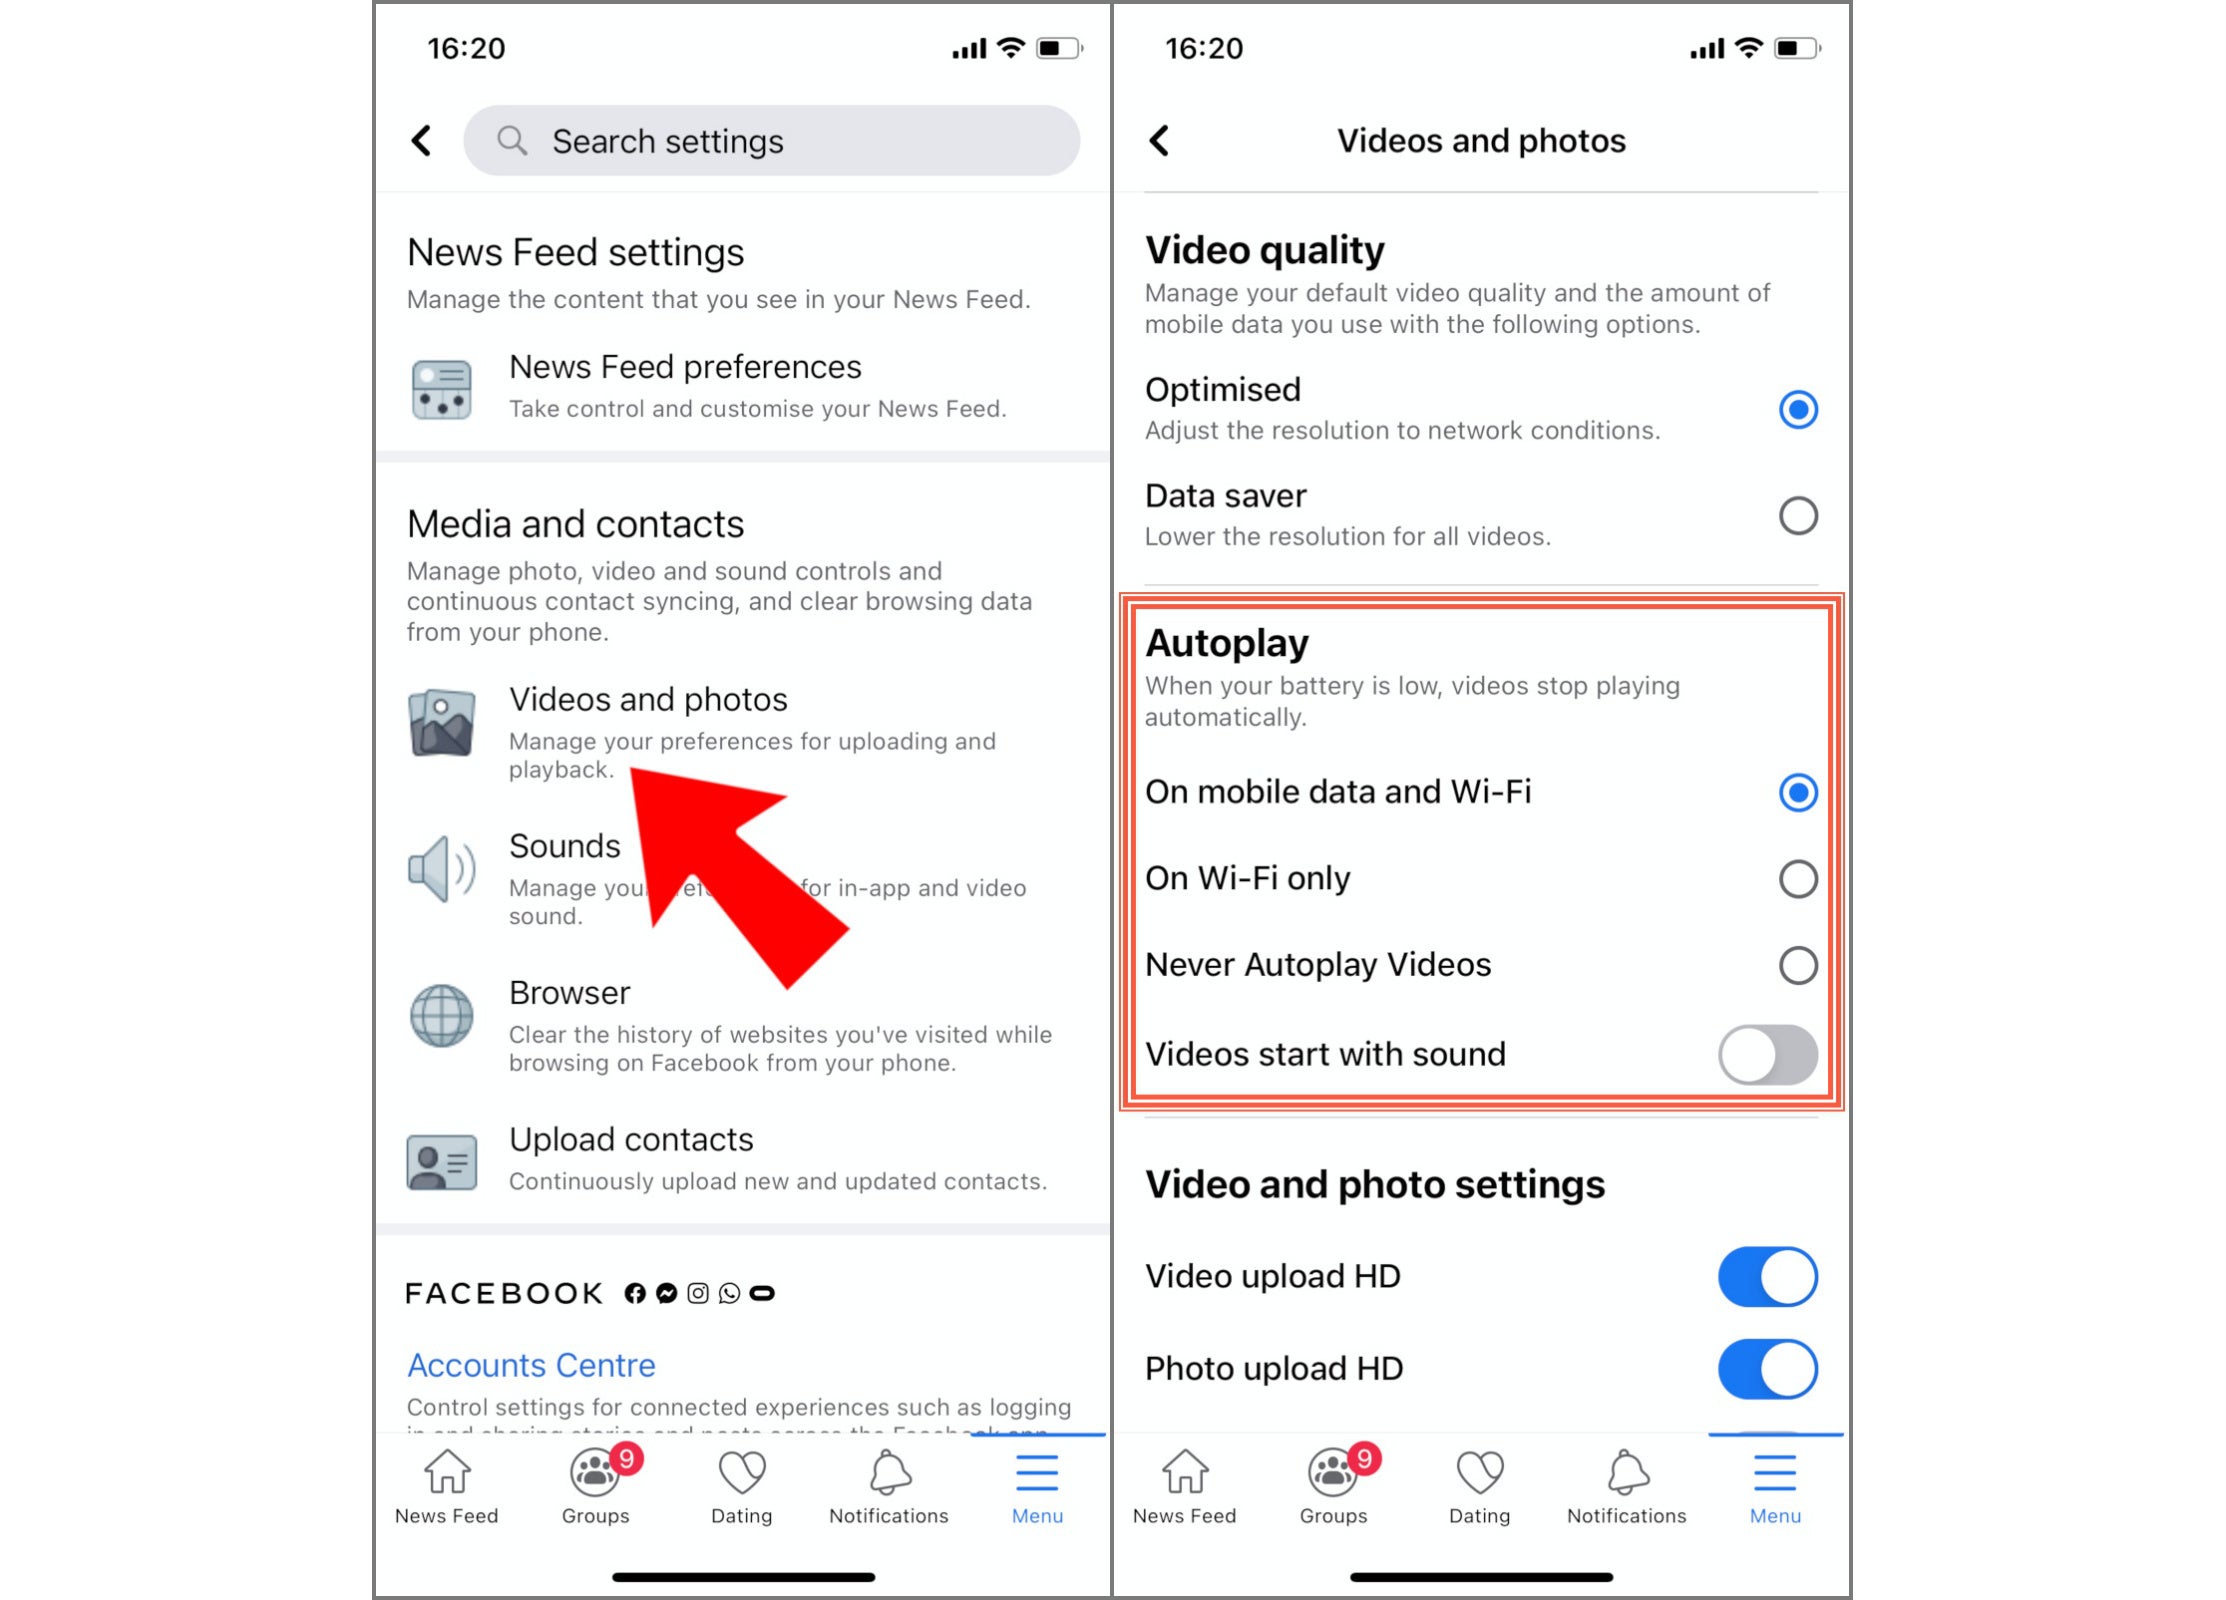 Videos and photos&nbsp;→ Autoplay - How to mute Facebook video autoplay, or disable autoplay entirely